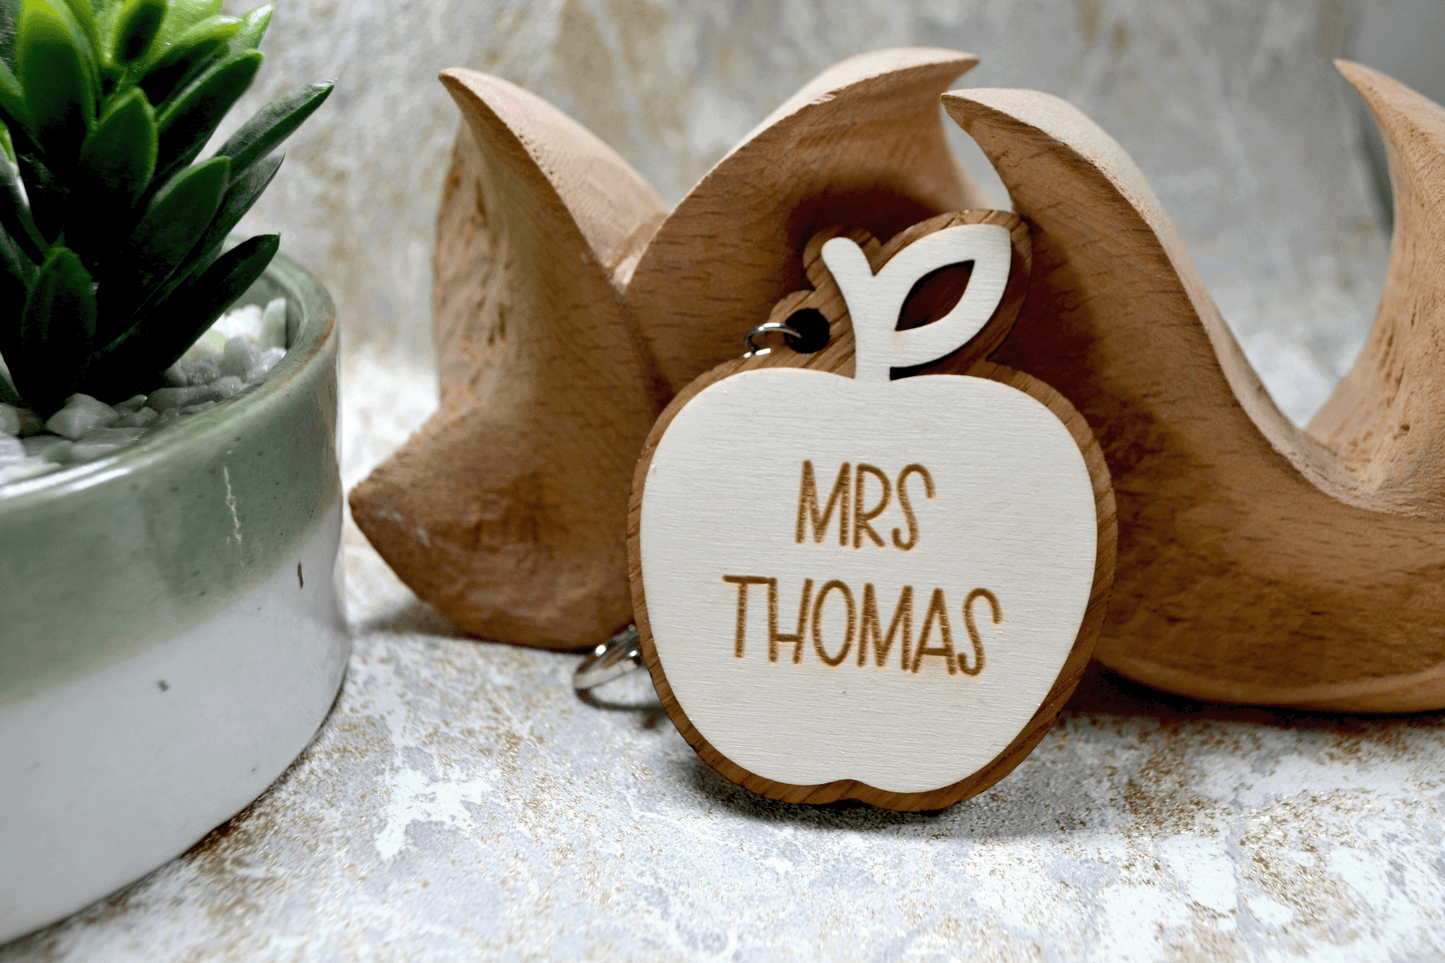 Thank You Teacher Gift - Personalised Wooden Apple